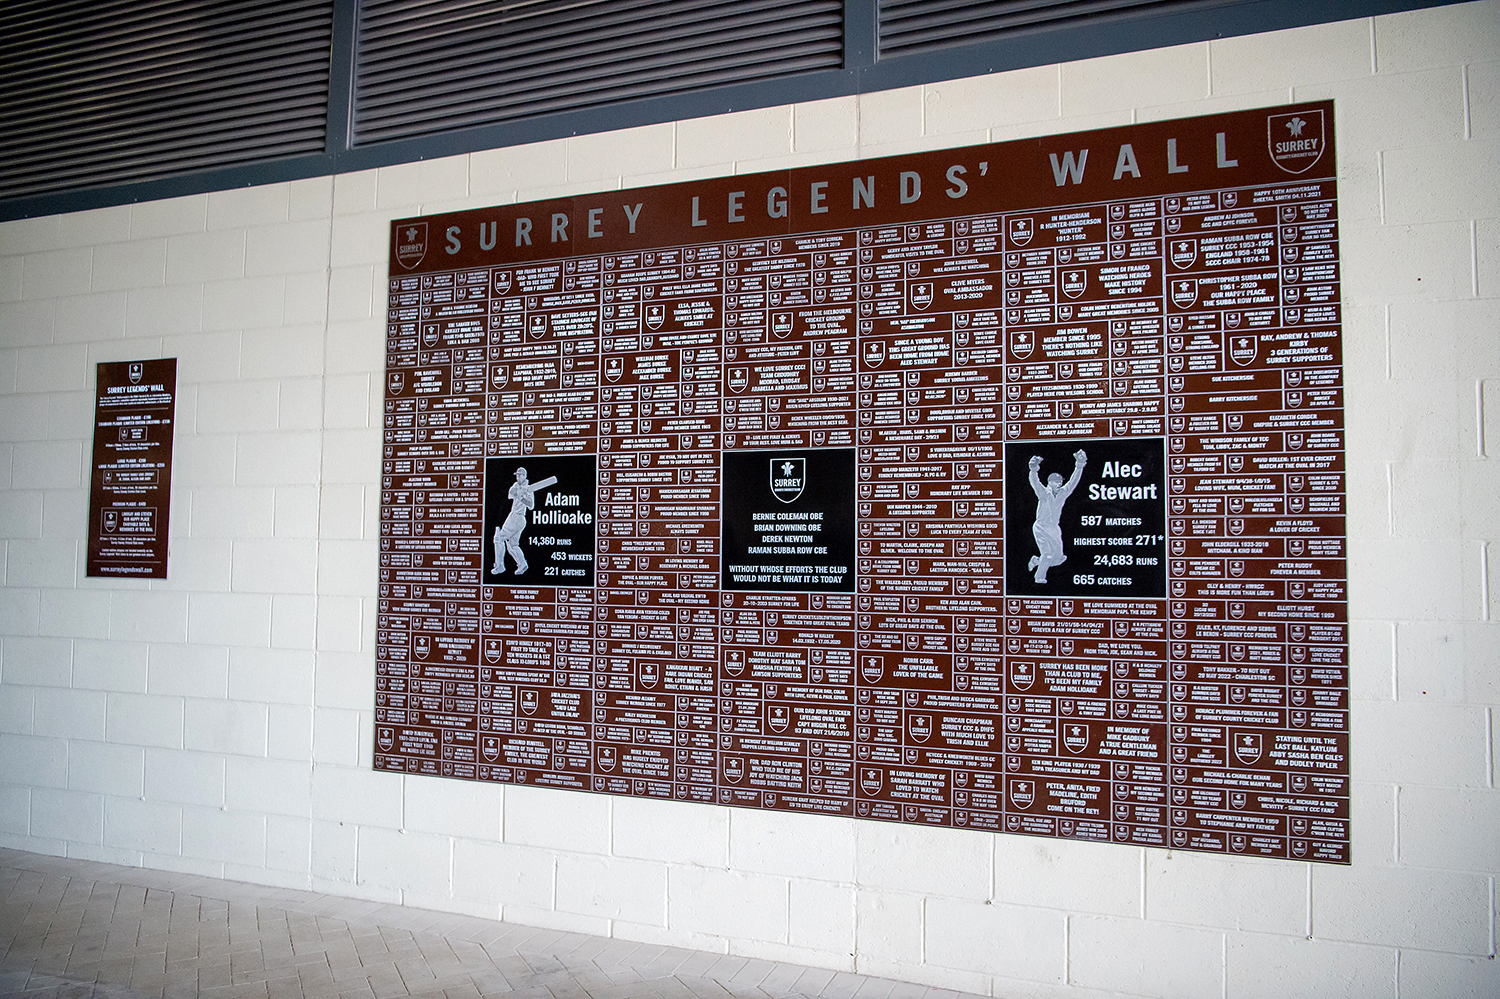 The Wall of Legends at Surrey